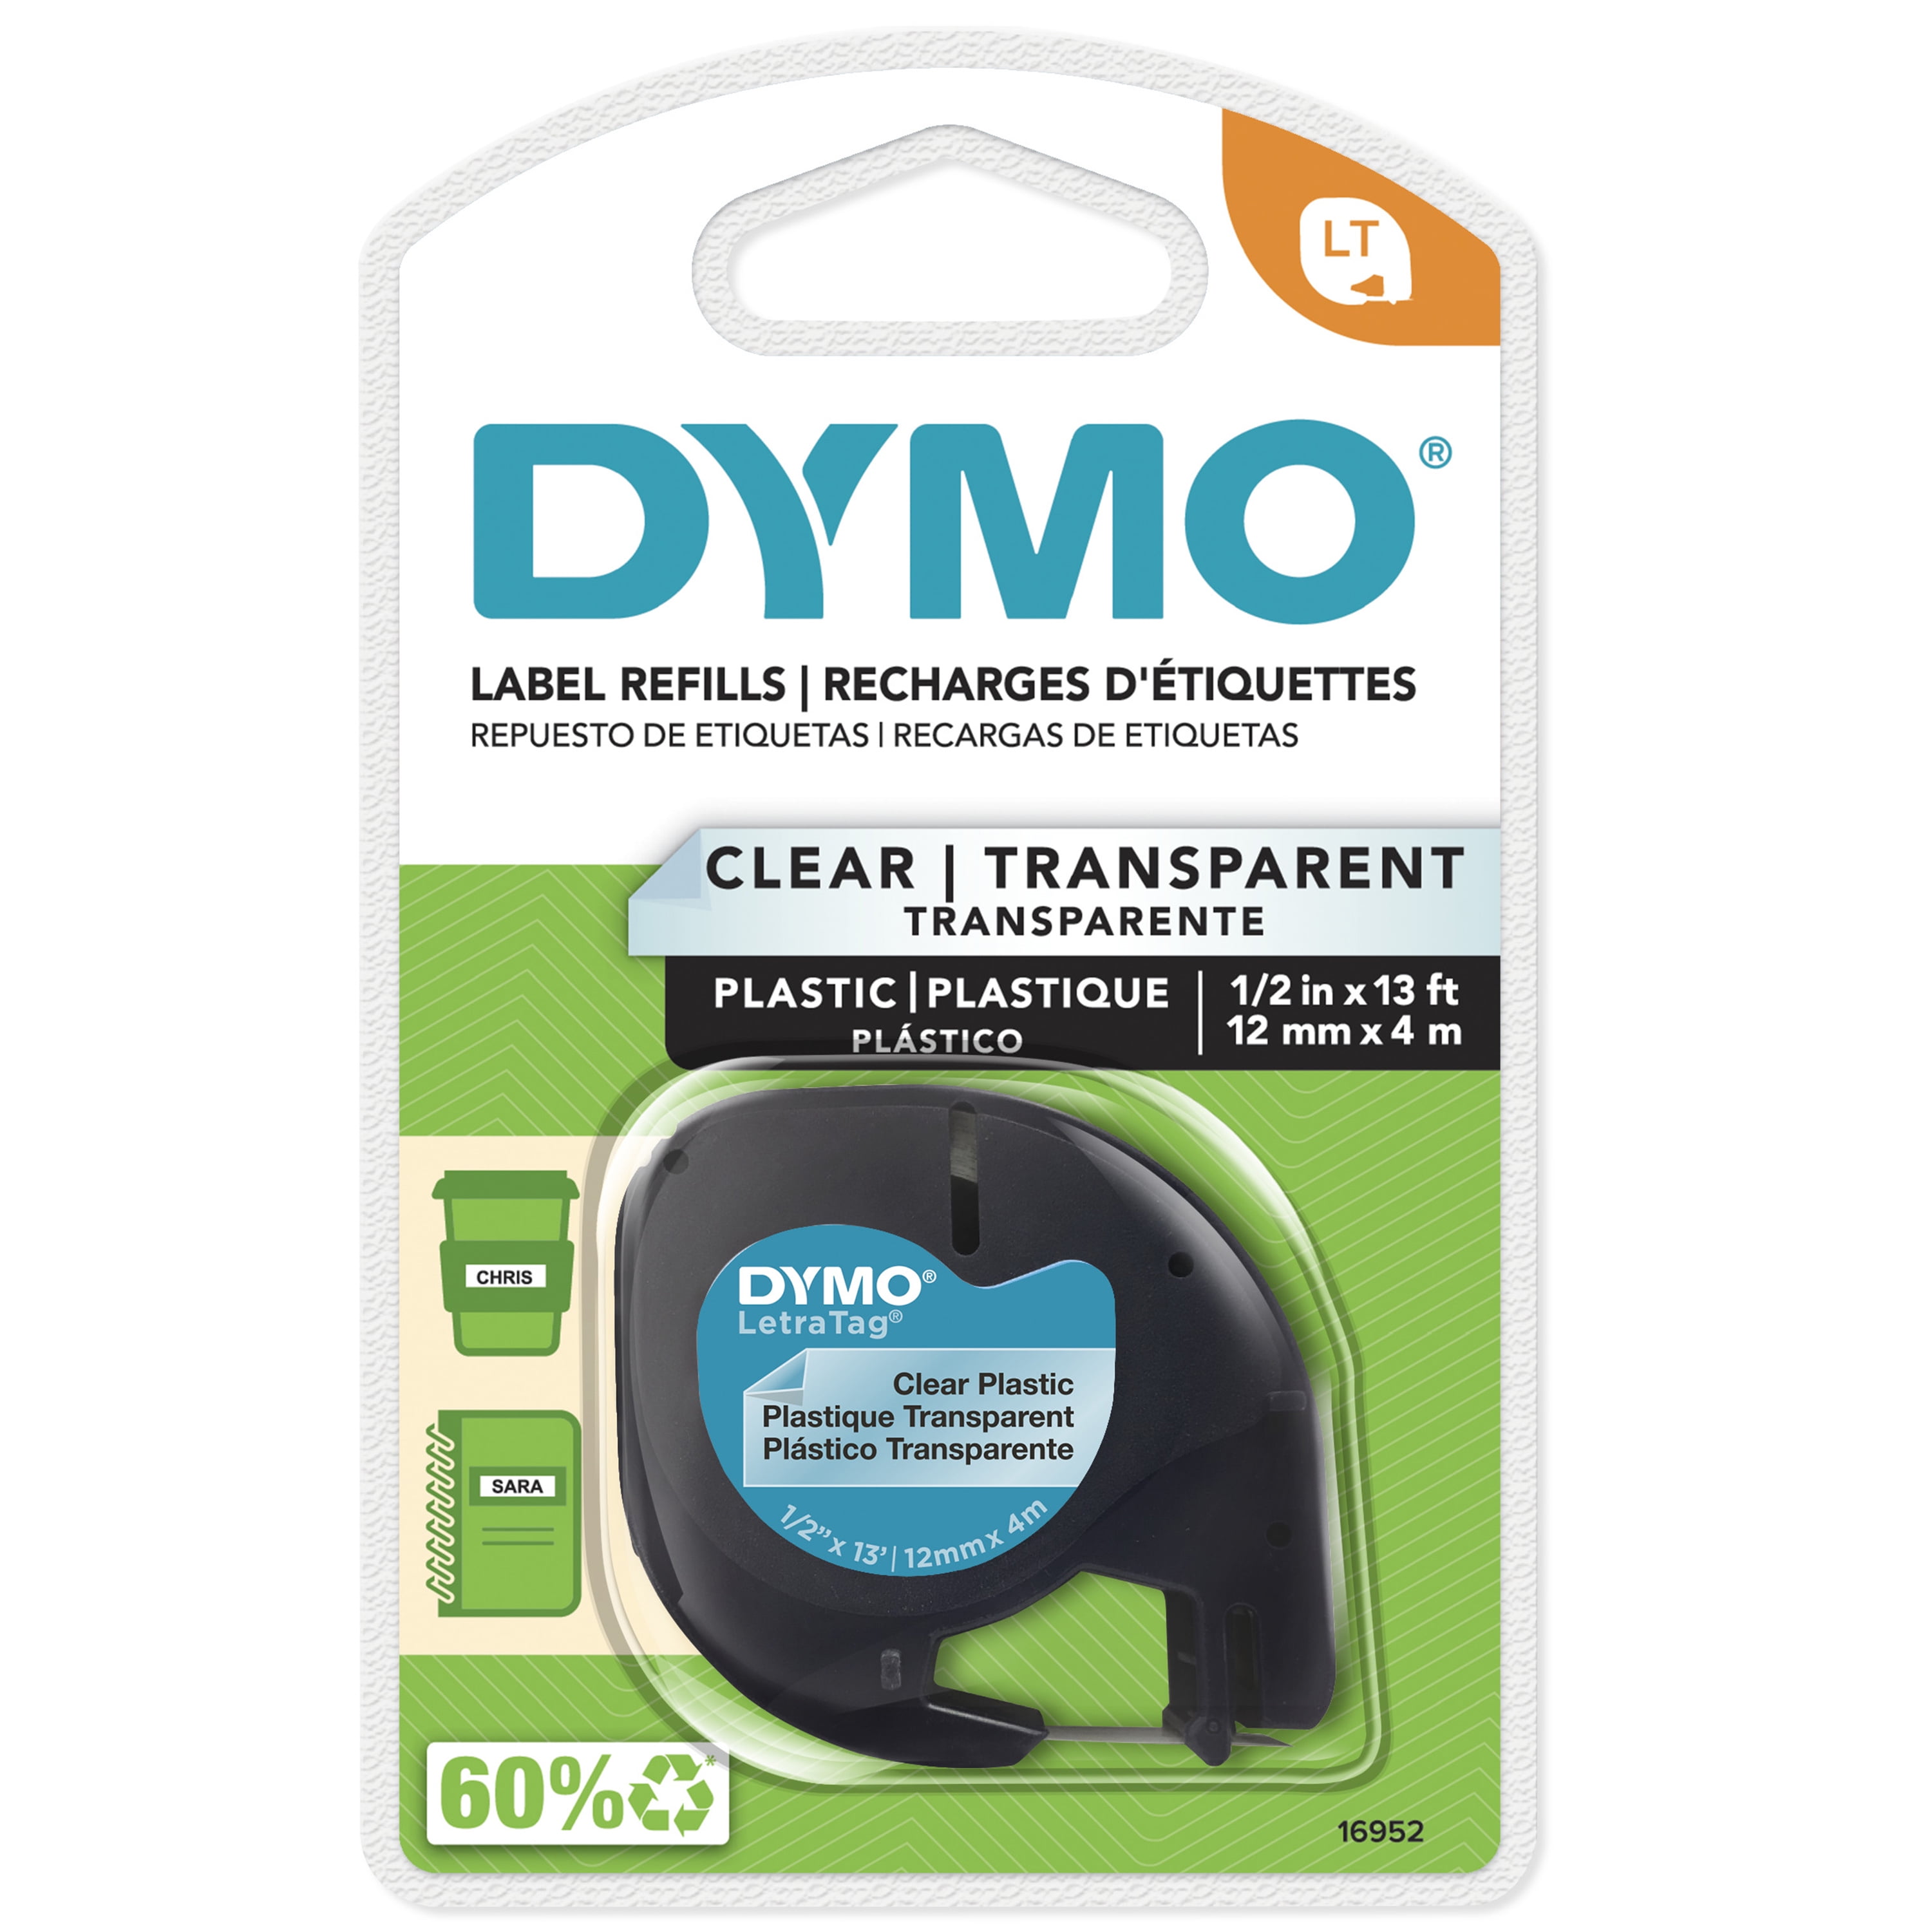 Dymo Dymo White Refill Labels Letra Tag LT 1/2 in x 13 ft.Sealed 